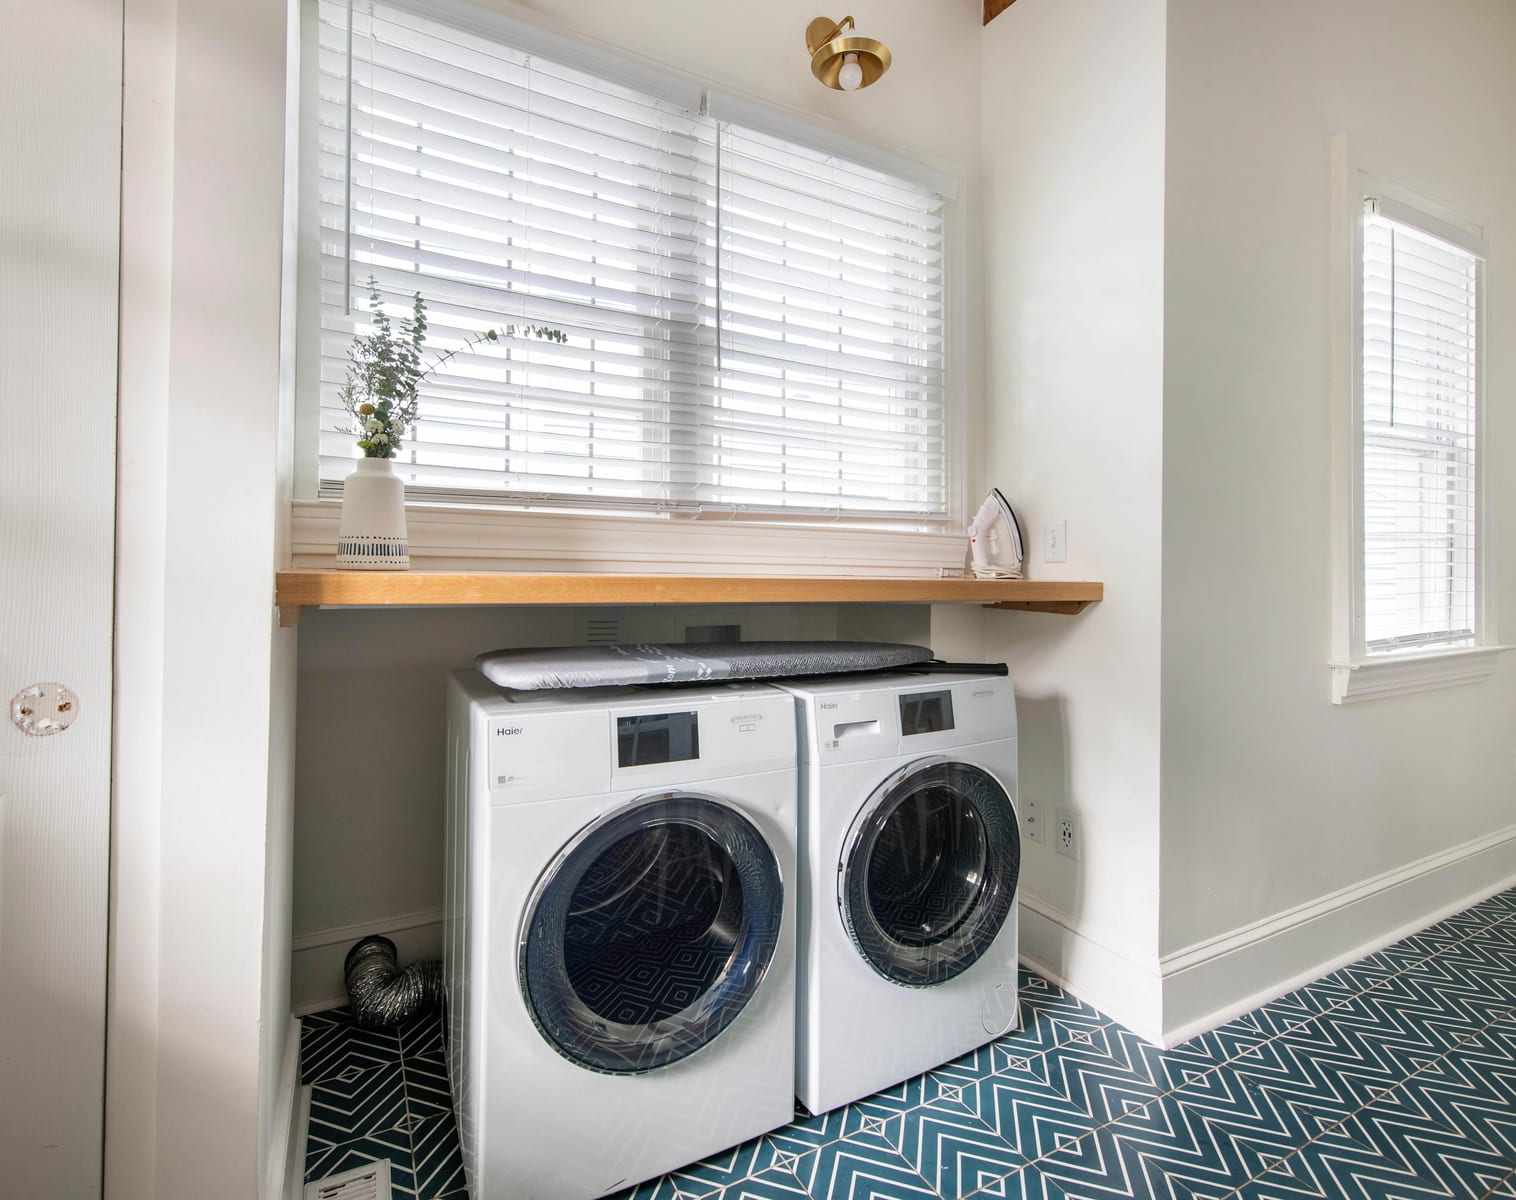 Laundry + Dryer for your use